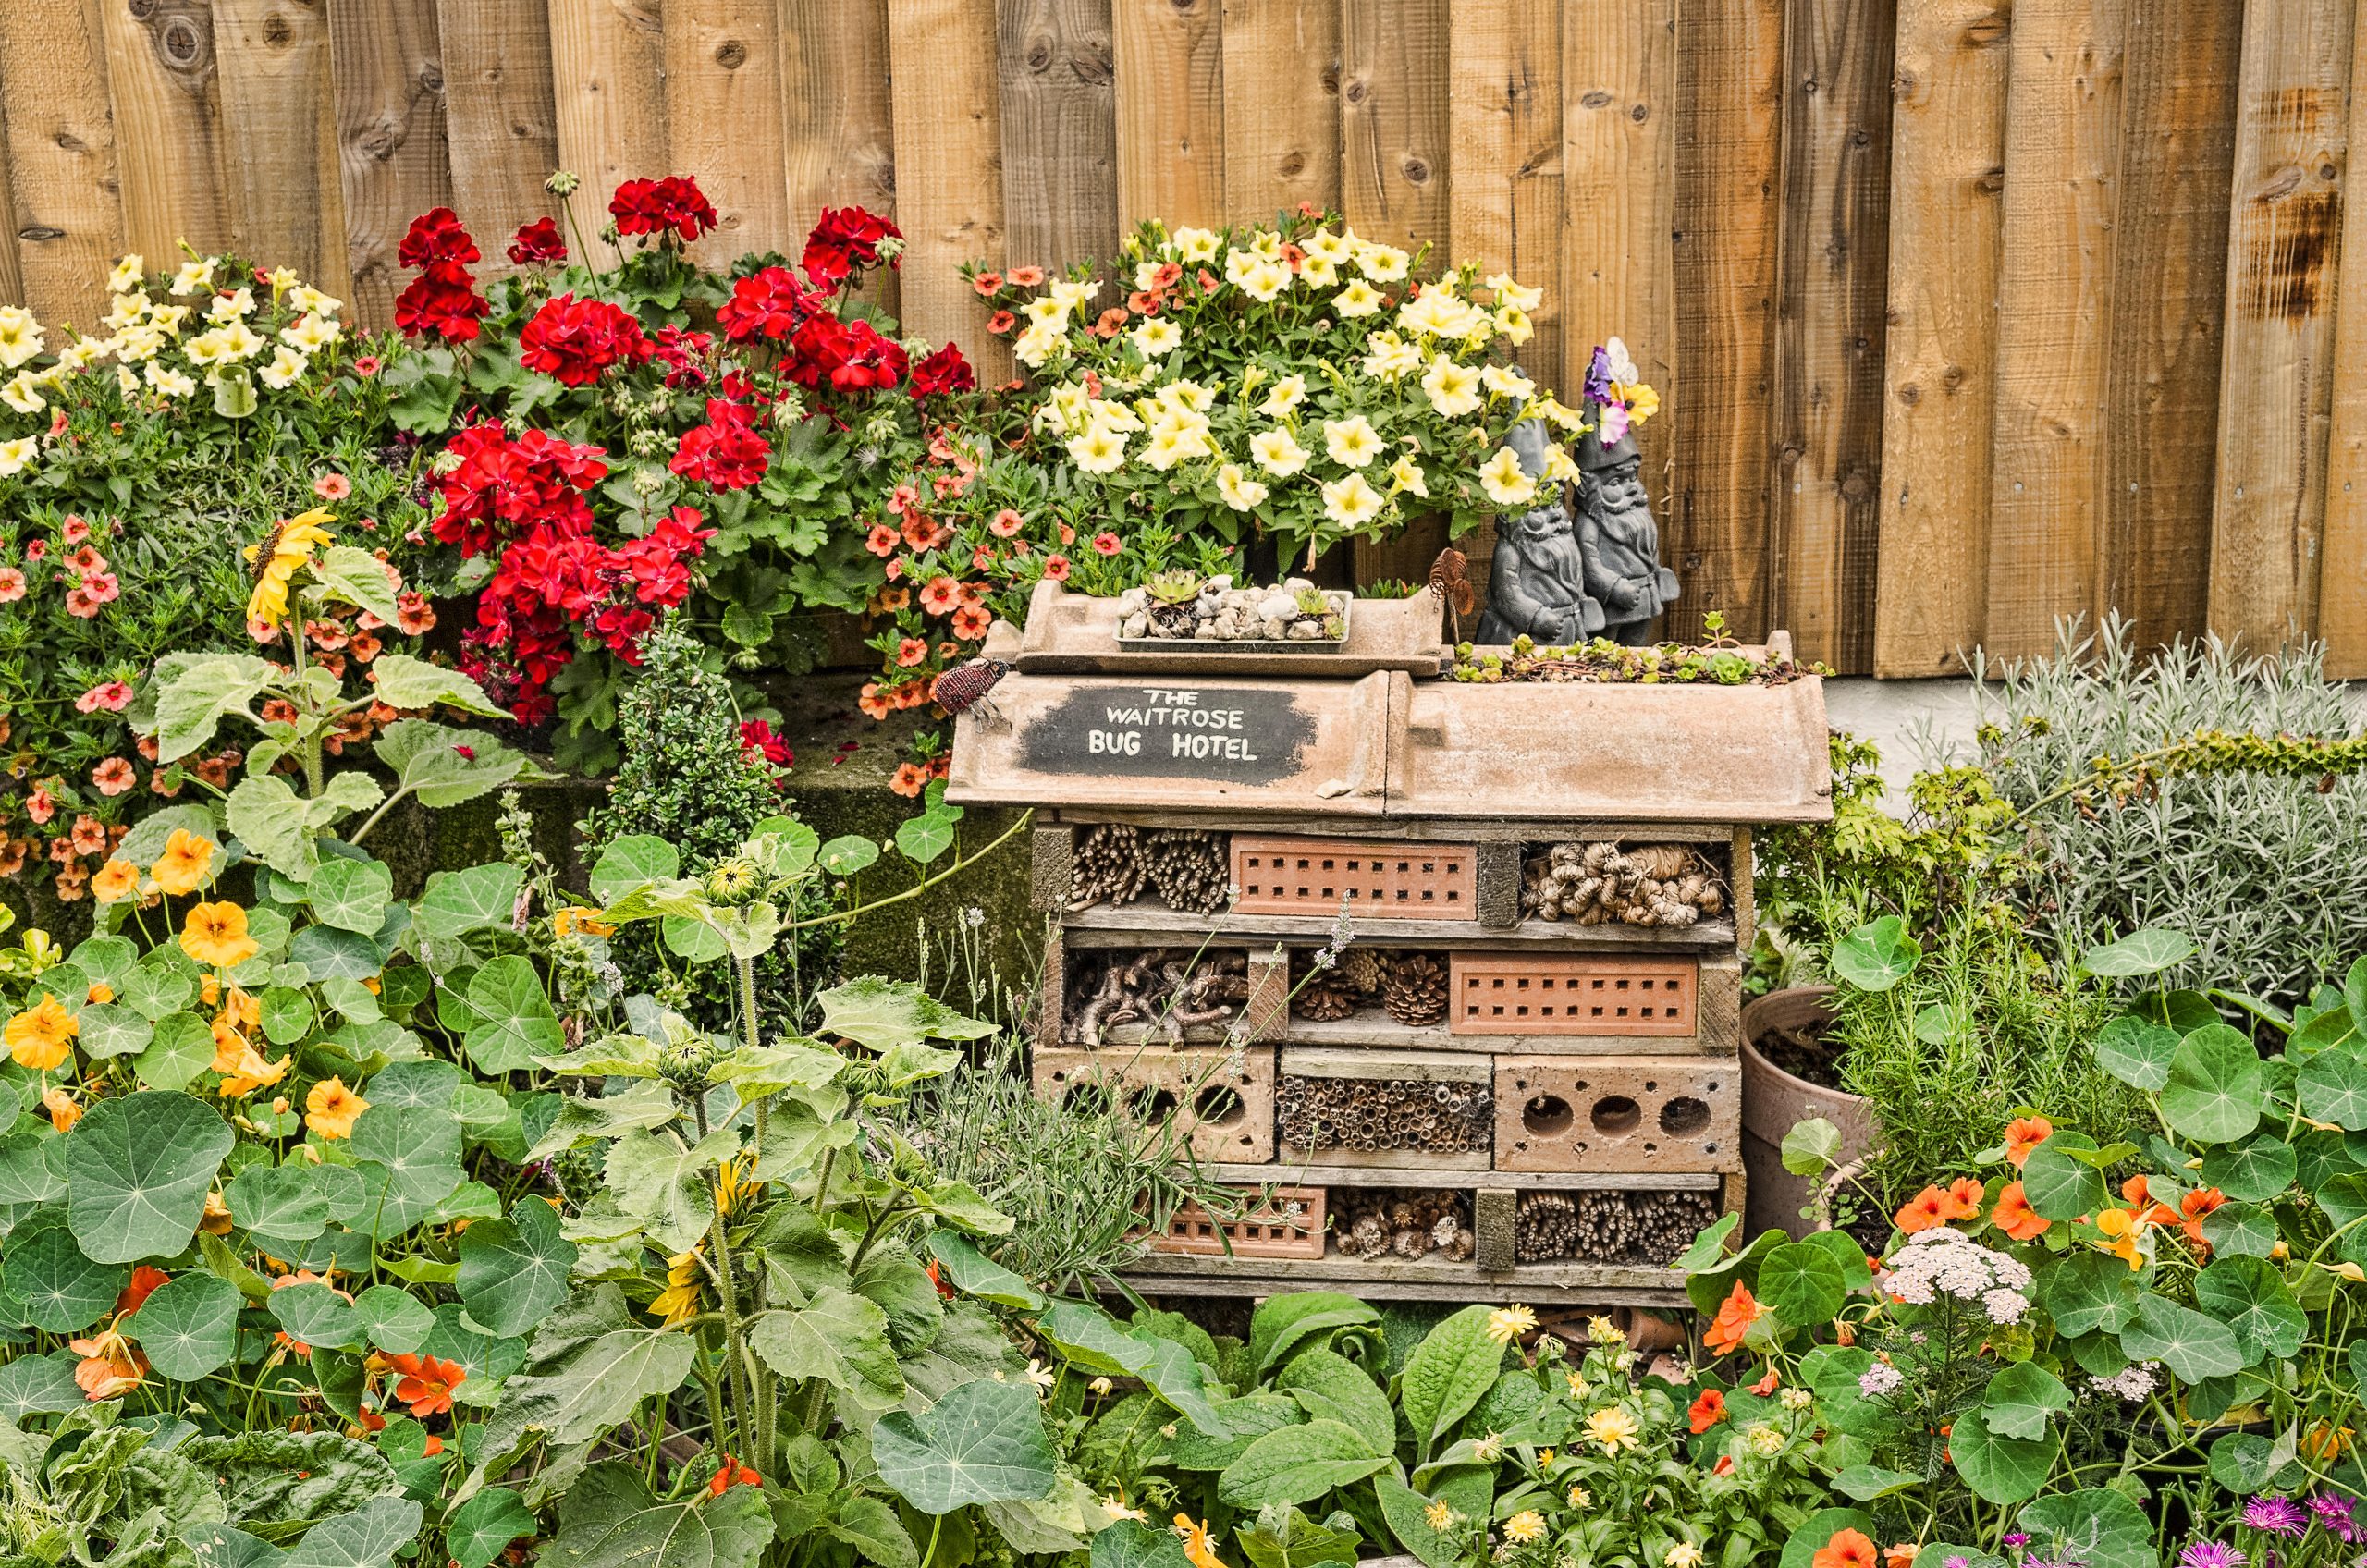 Easy crafts for kids illustrated by bug hotel